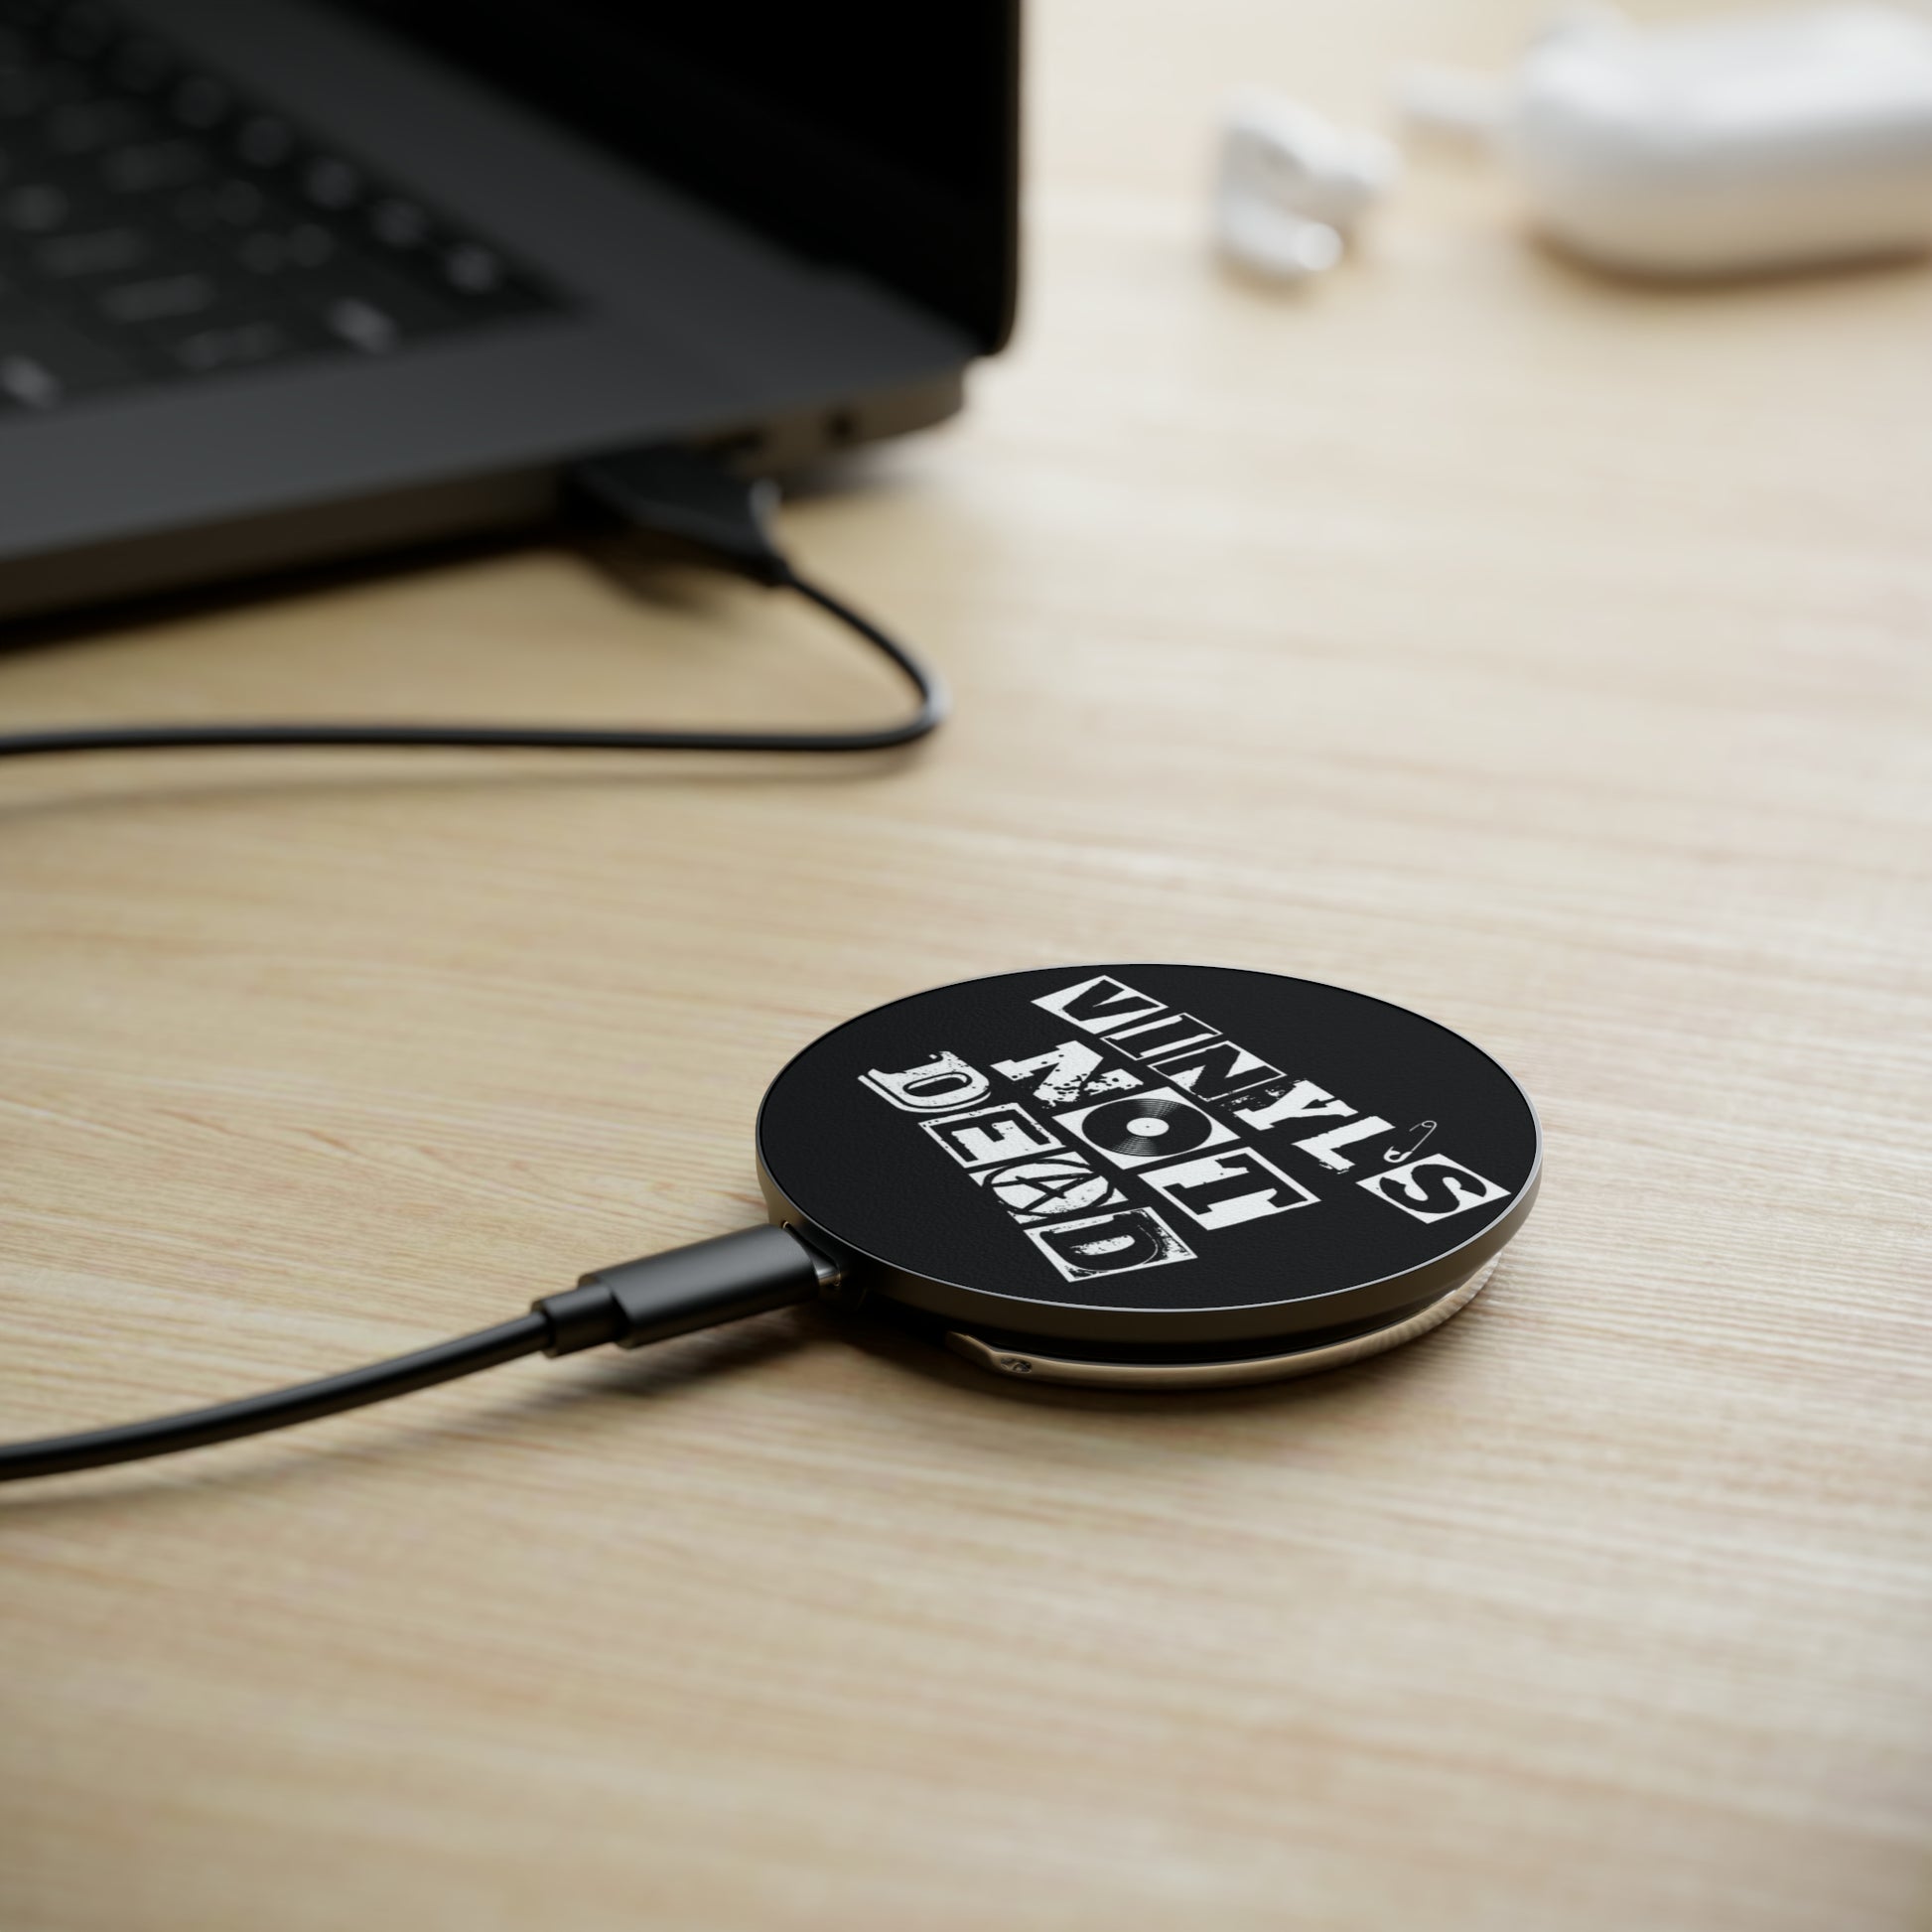 Vinyl Record Themed Magnetic Induction Charger with Vinyl is Not Dead Print on table